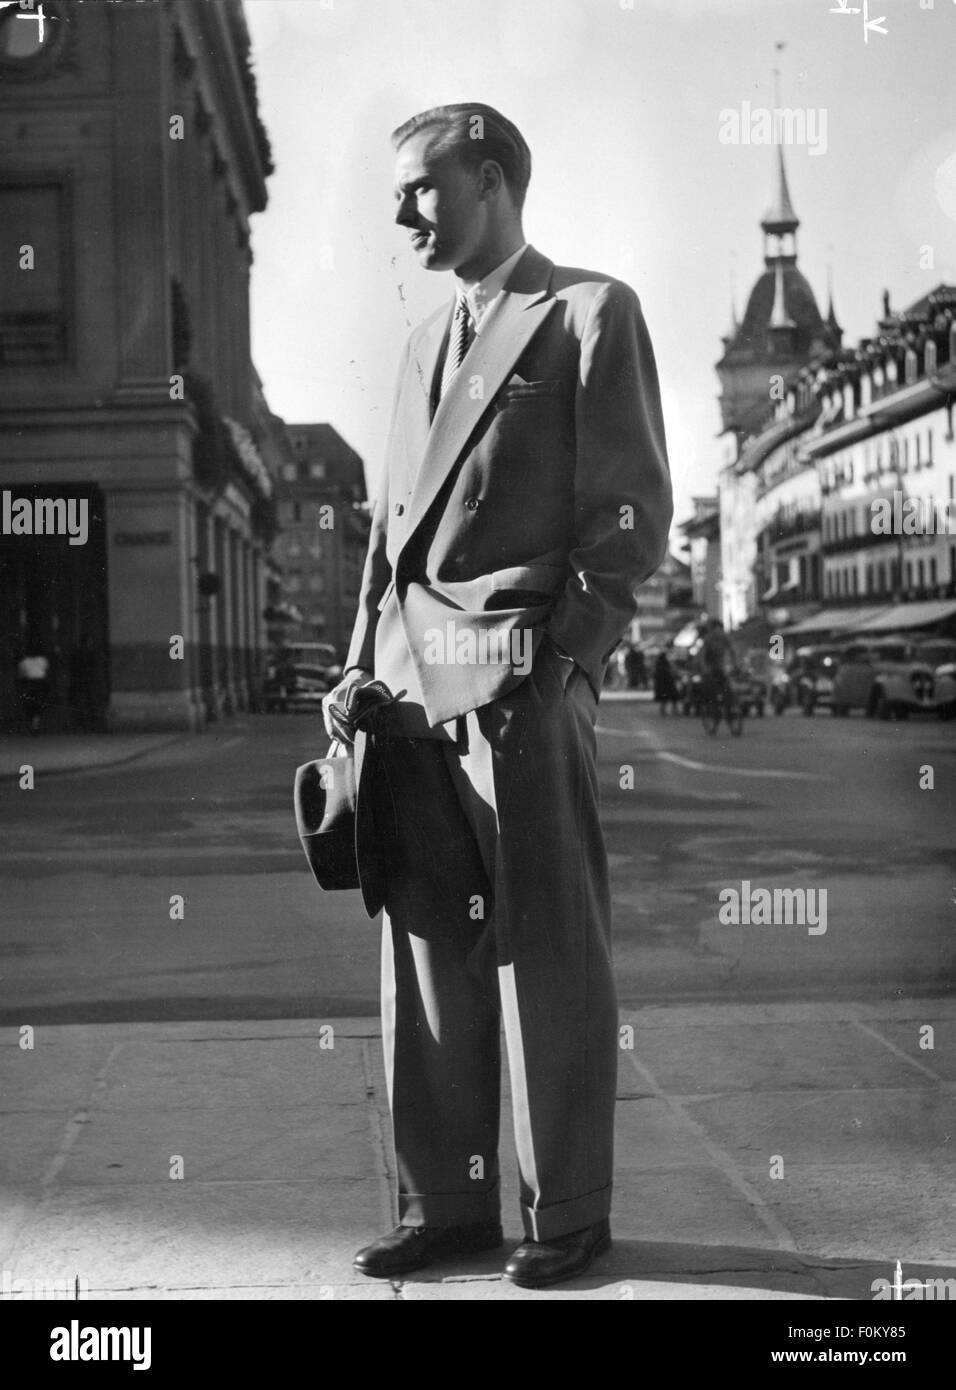 Mode, 50er Jahre, junger Mann im Anzug, Bern, 1951,  Additional-Rights-Clearences-not available Stockfotografie - Alamy